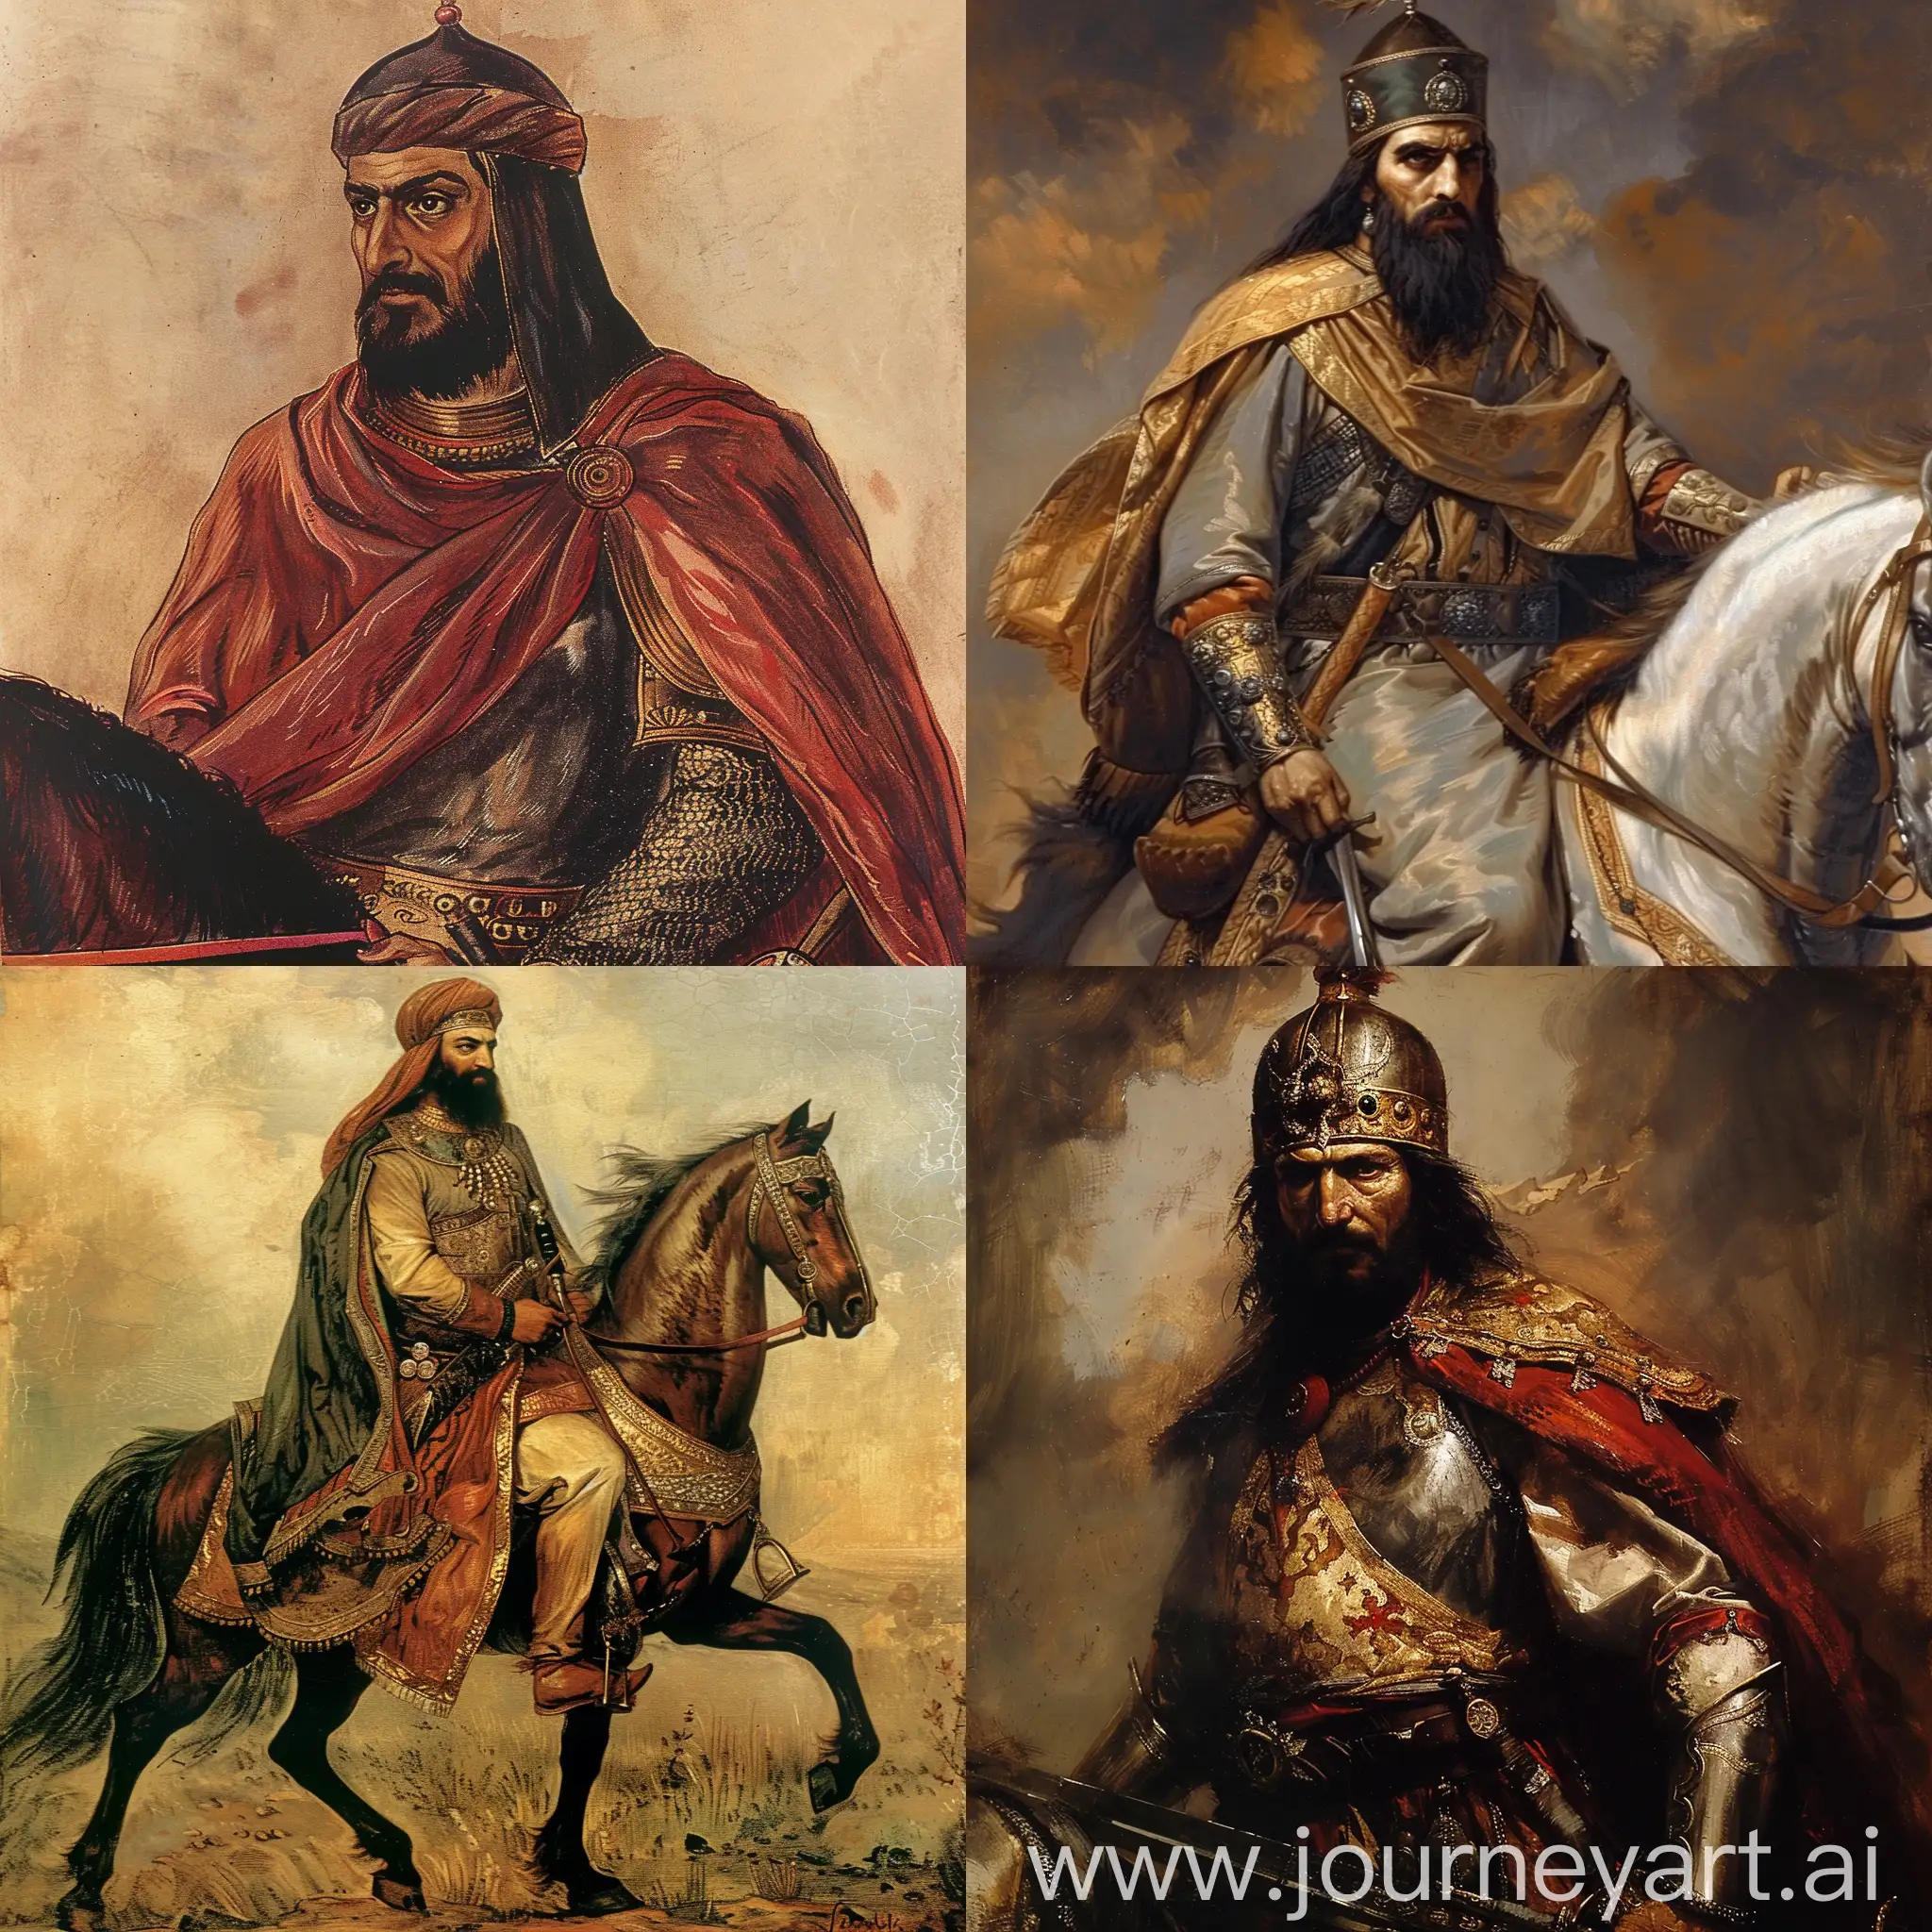 Salah ad-Din al-Ayubi, also known as Saladin, was one of the most significant and legendary